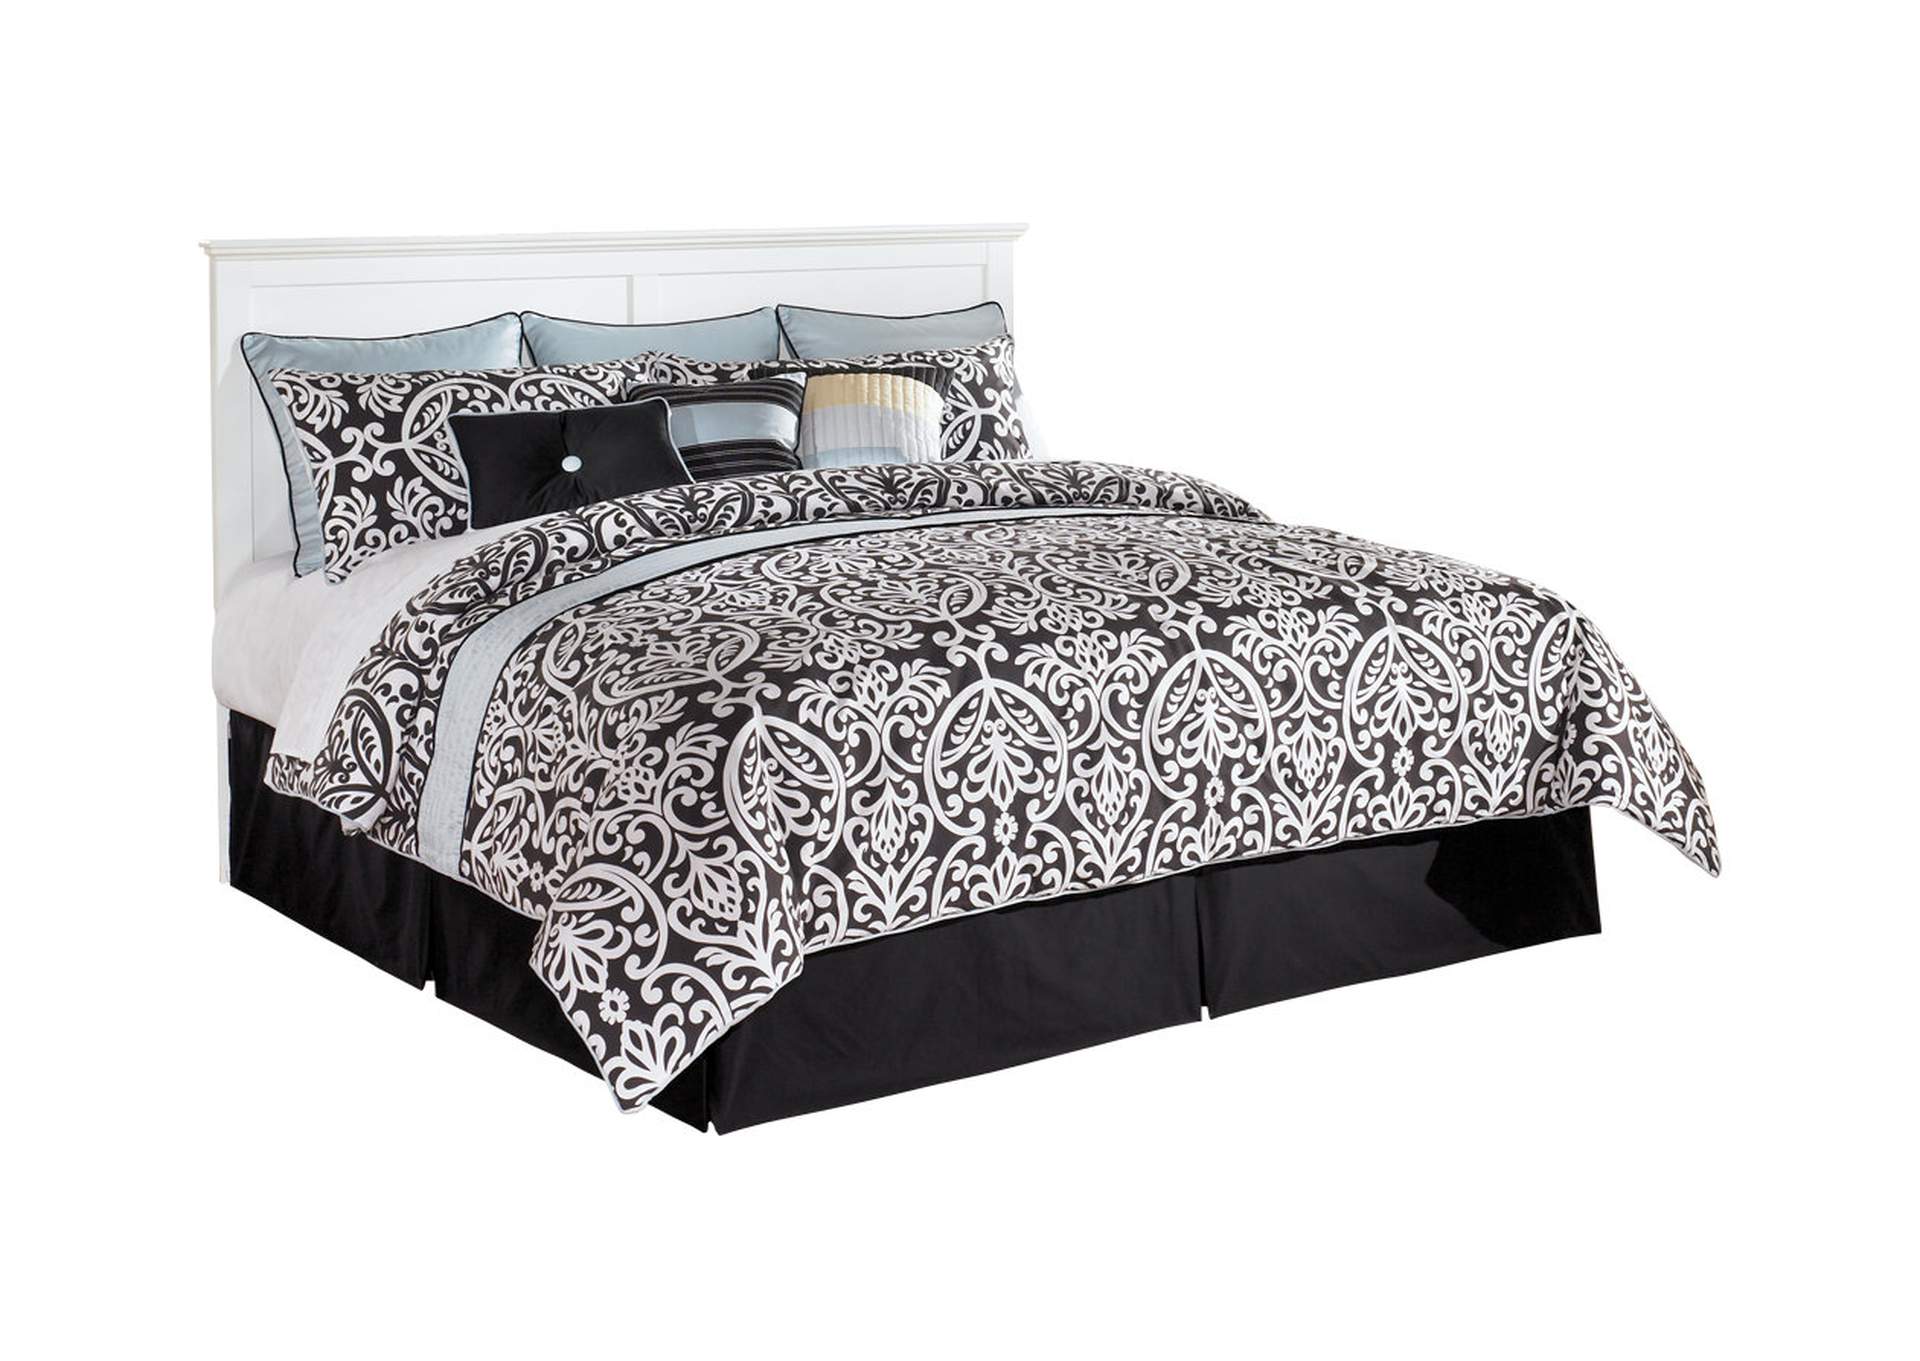 Bostwick Shoals King Panel Bed, Dresser, Mirror and 2 Nightstands,Signature Design By Ashley